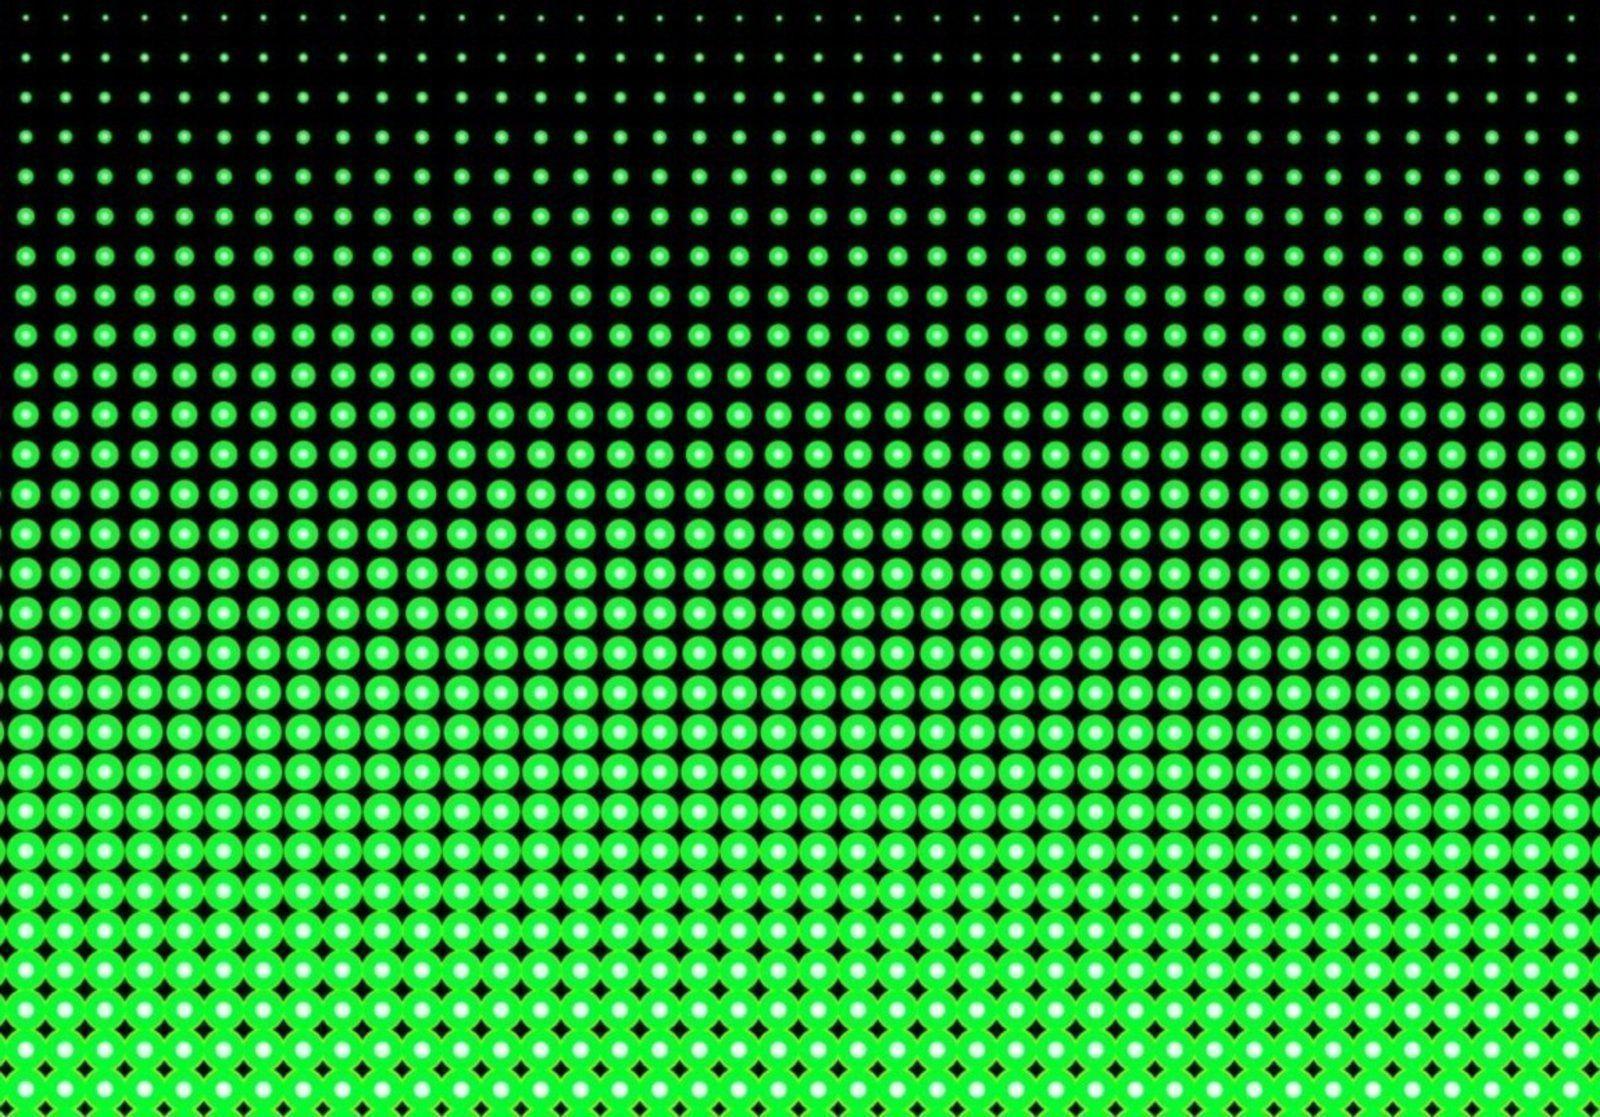 Wallpaper For > Background Green And Black